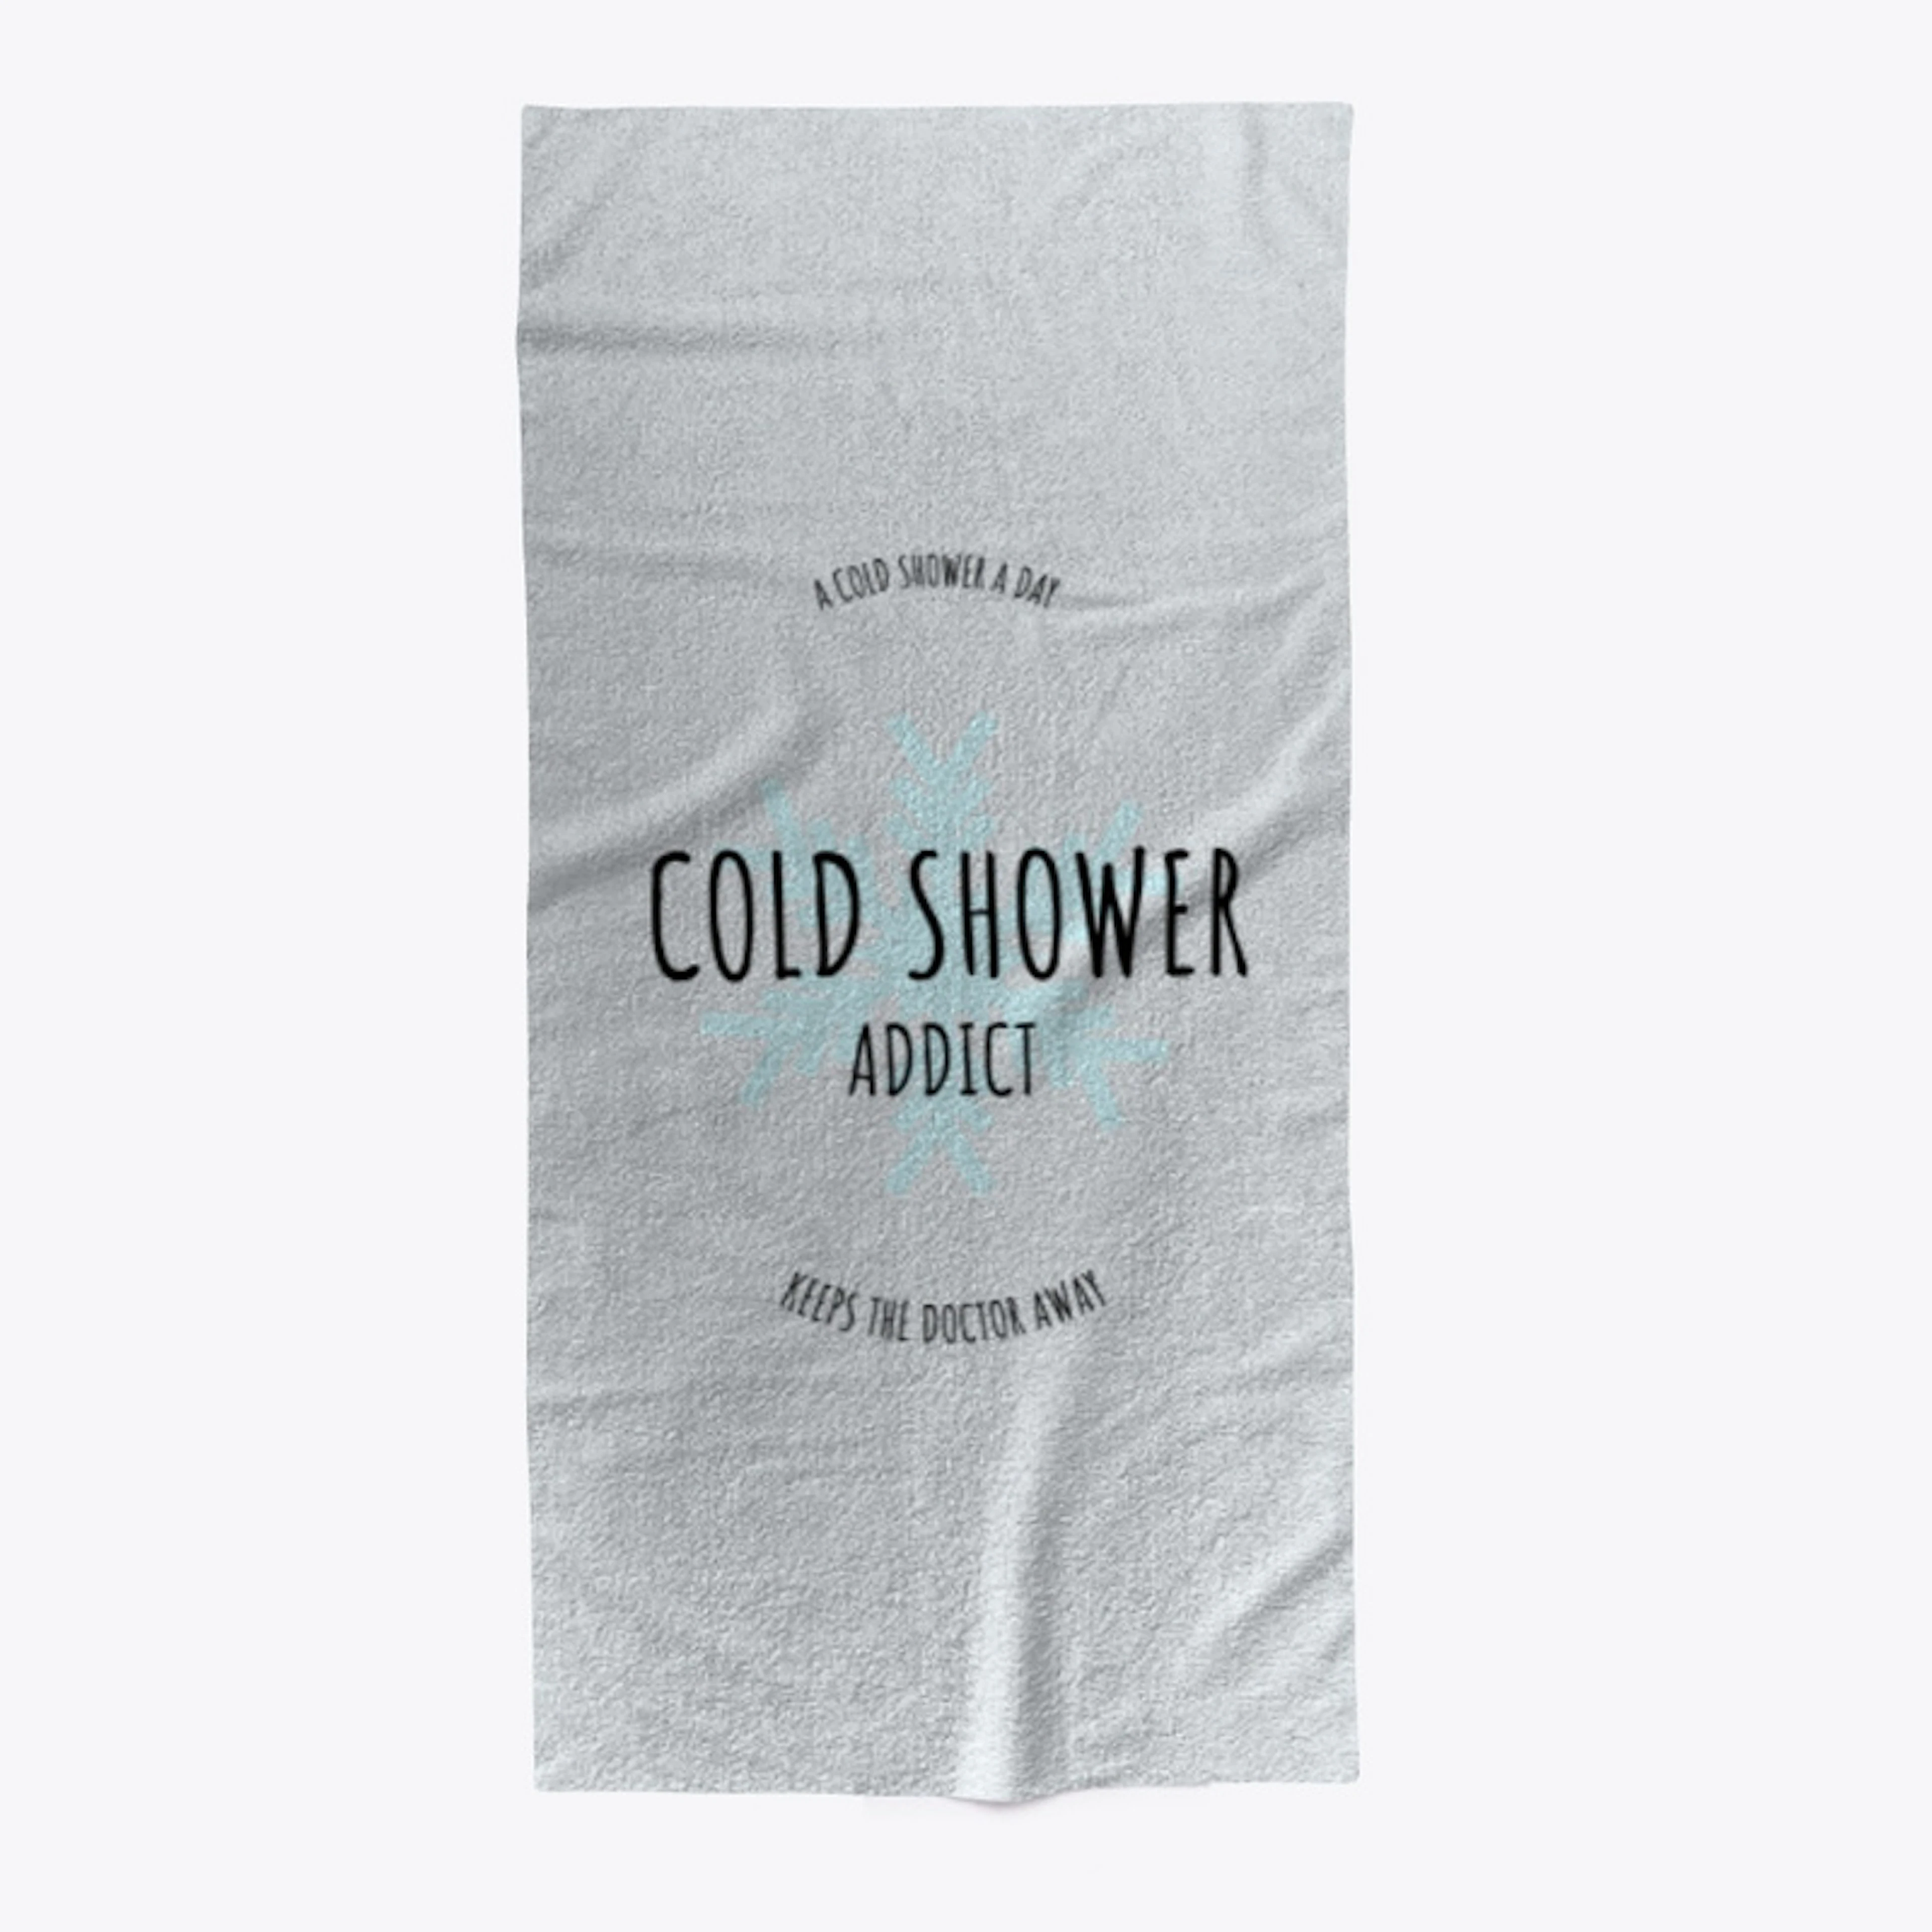 Cold shower a day keeps the doctor away